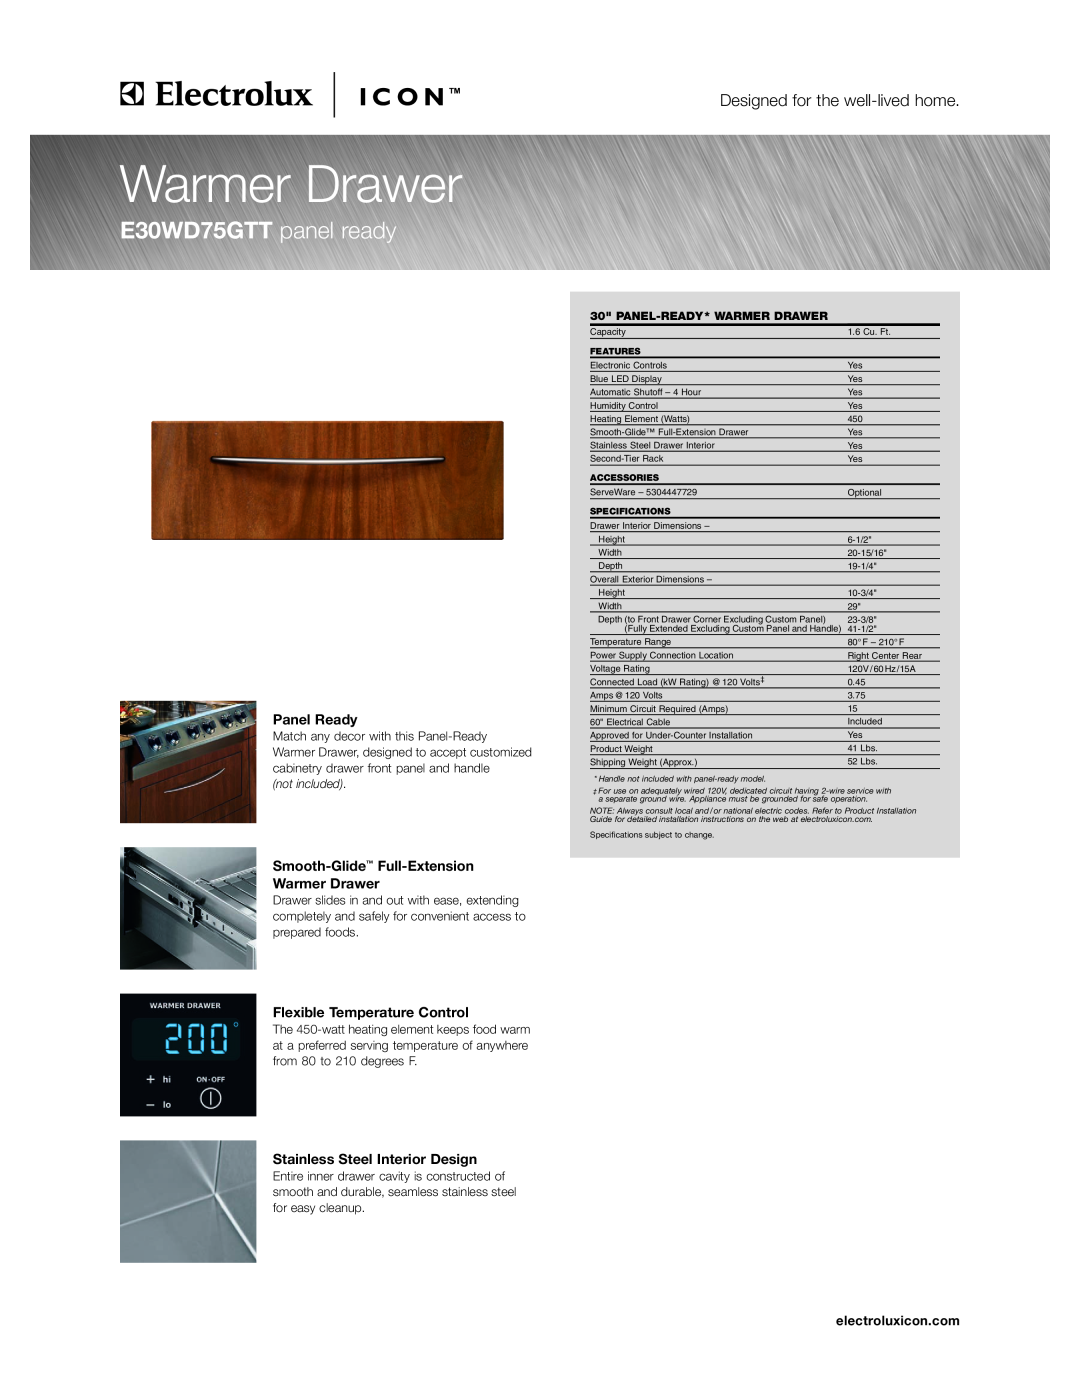 Electrolux E39WD75GTT specifications Panel Ready, Smooth-Glide Full-Extension Warmer Drawer, Flexible Temperature Control 